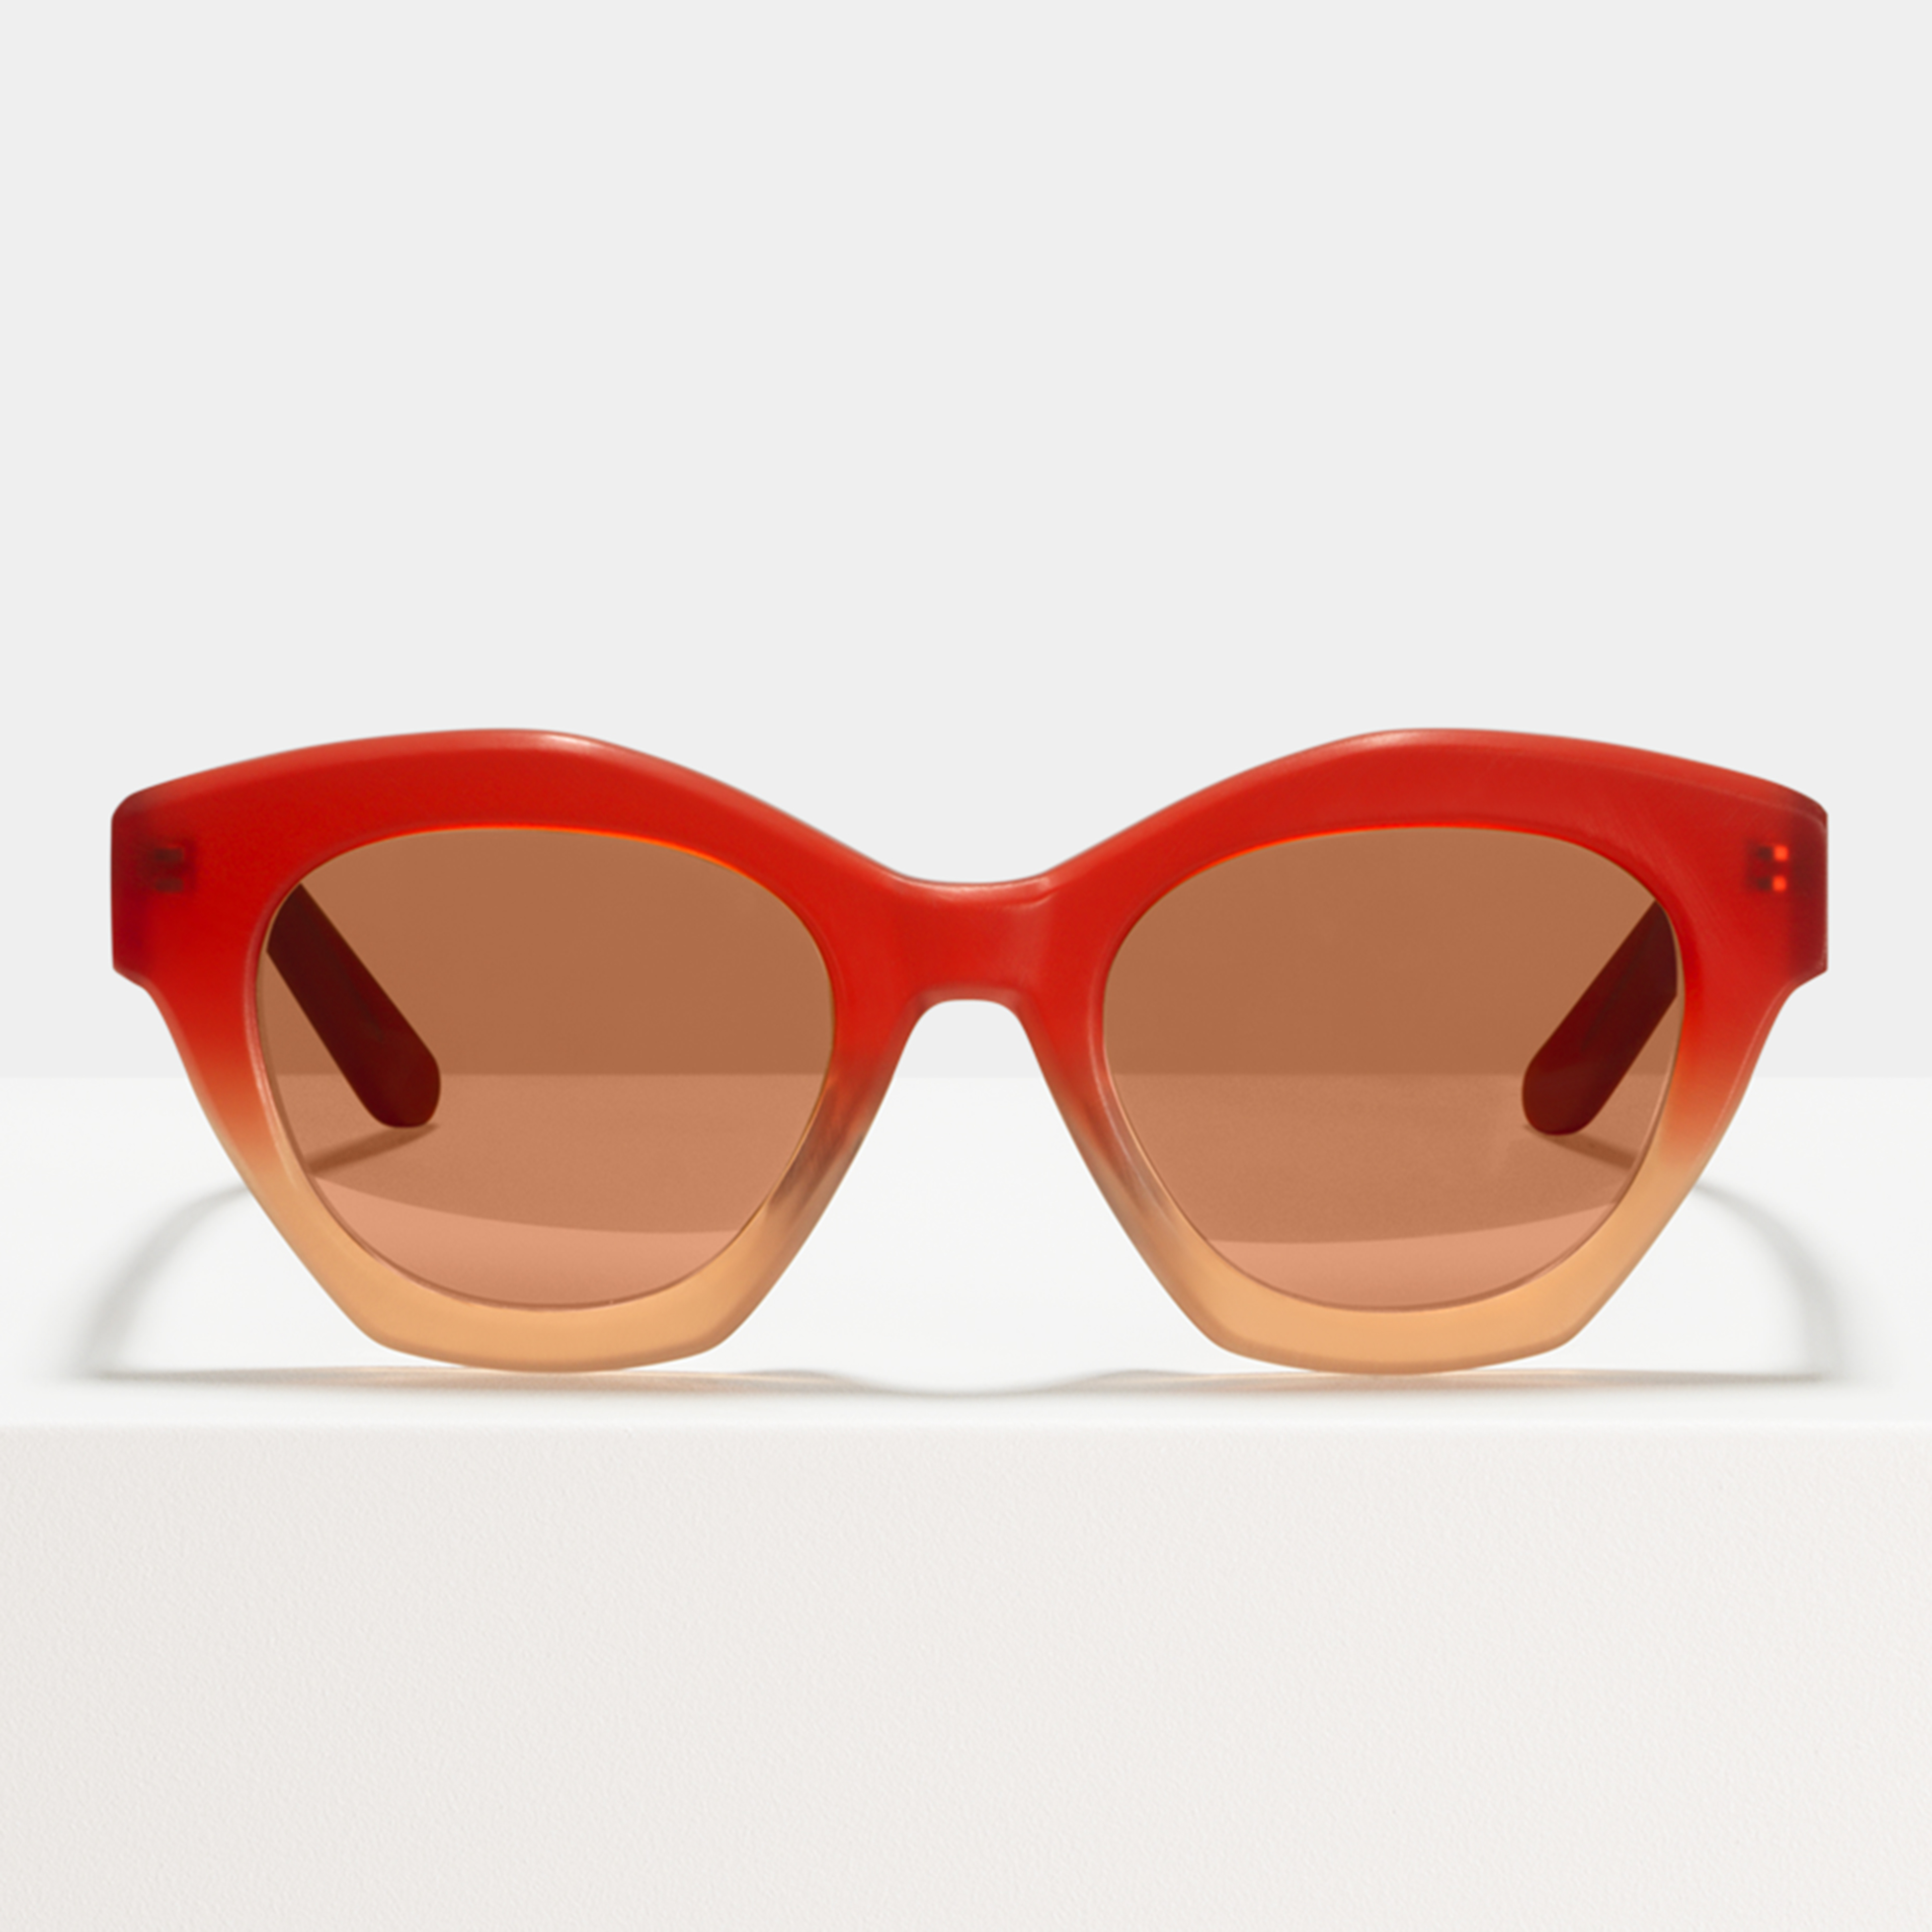 Ace & Tate Solaires |  Acétate in Orange, Rouge